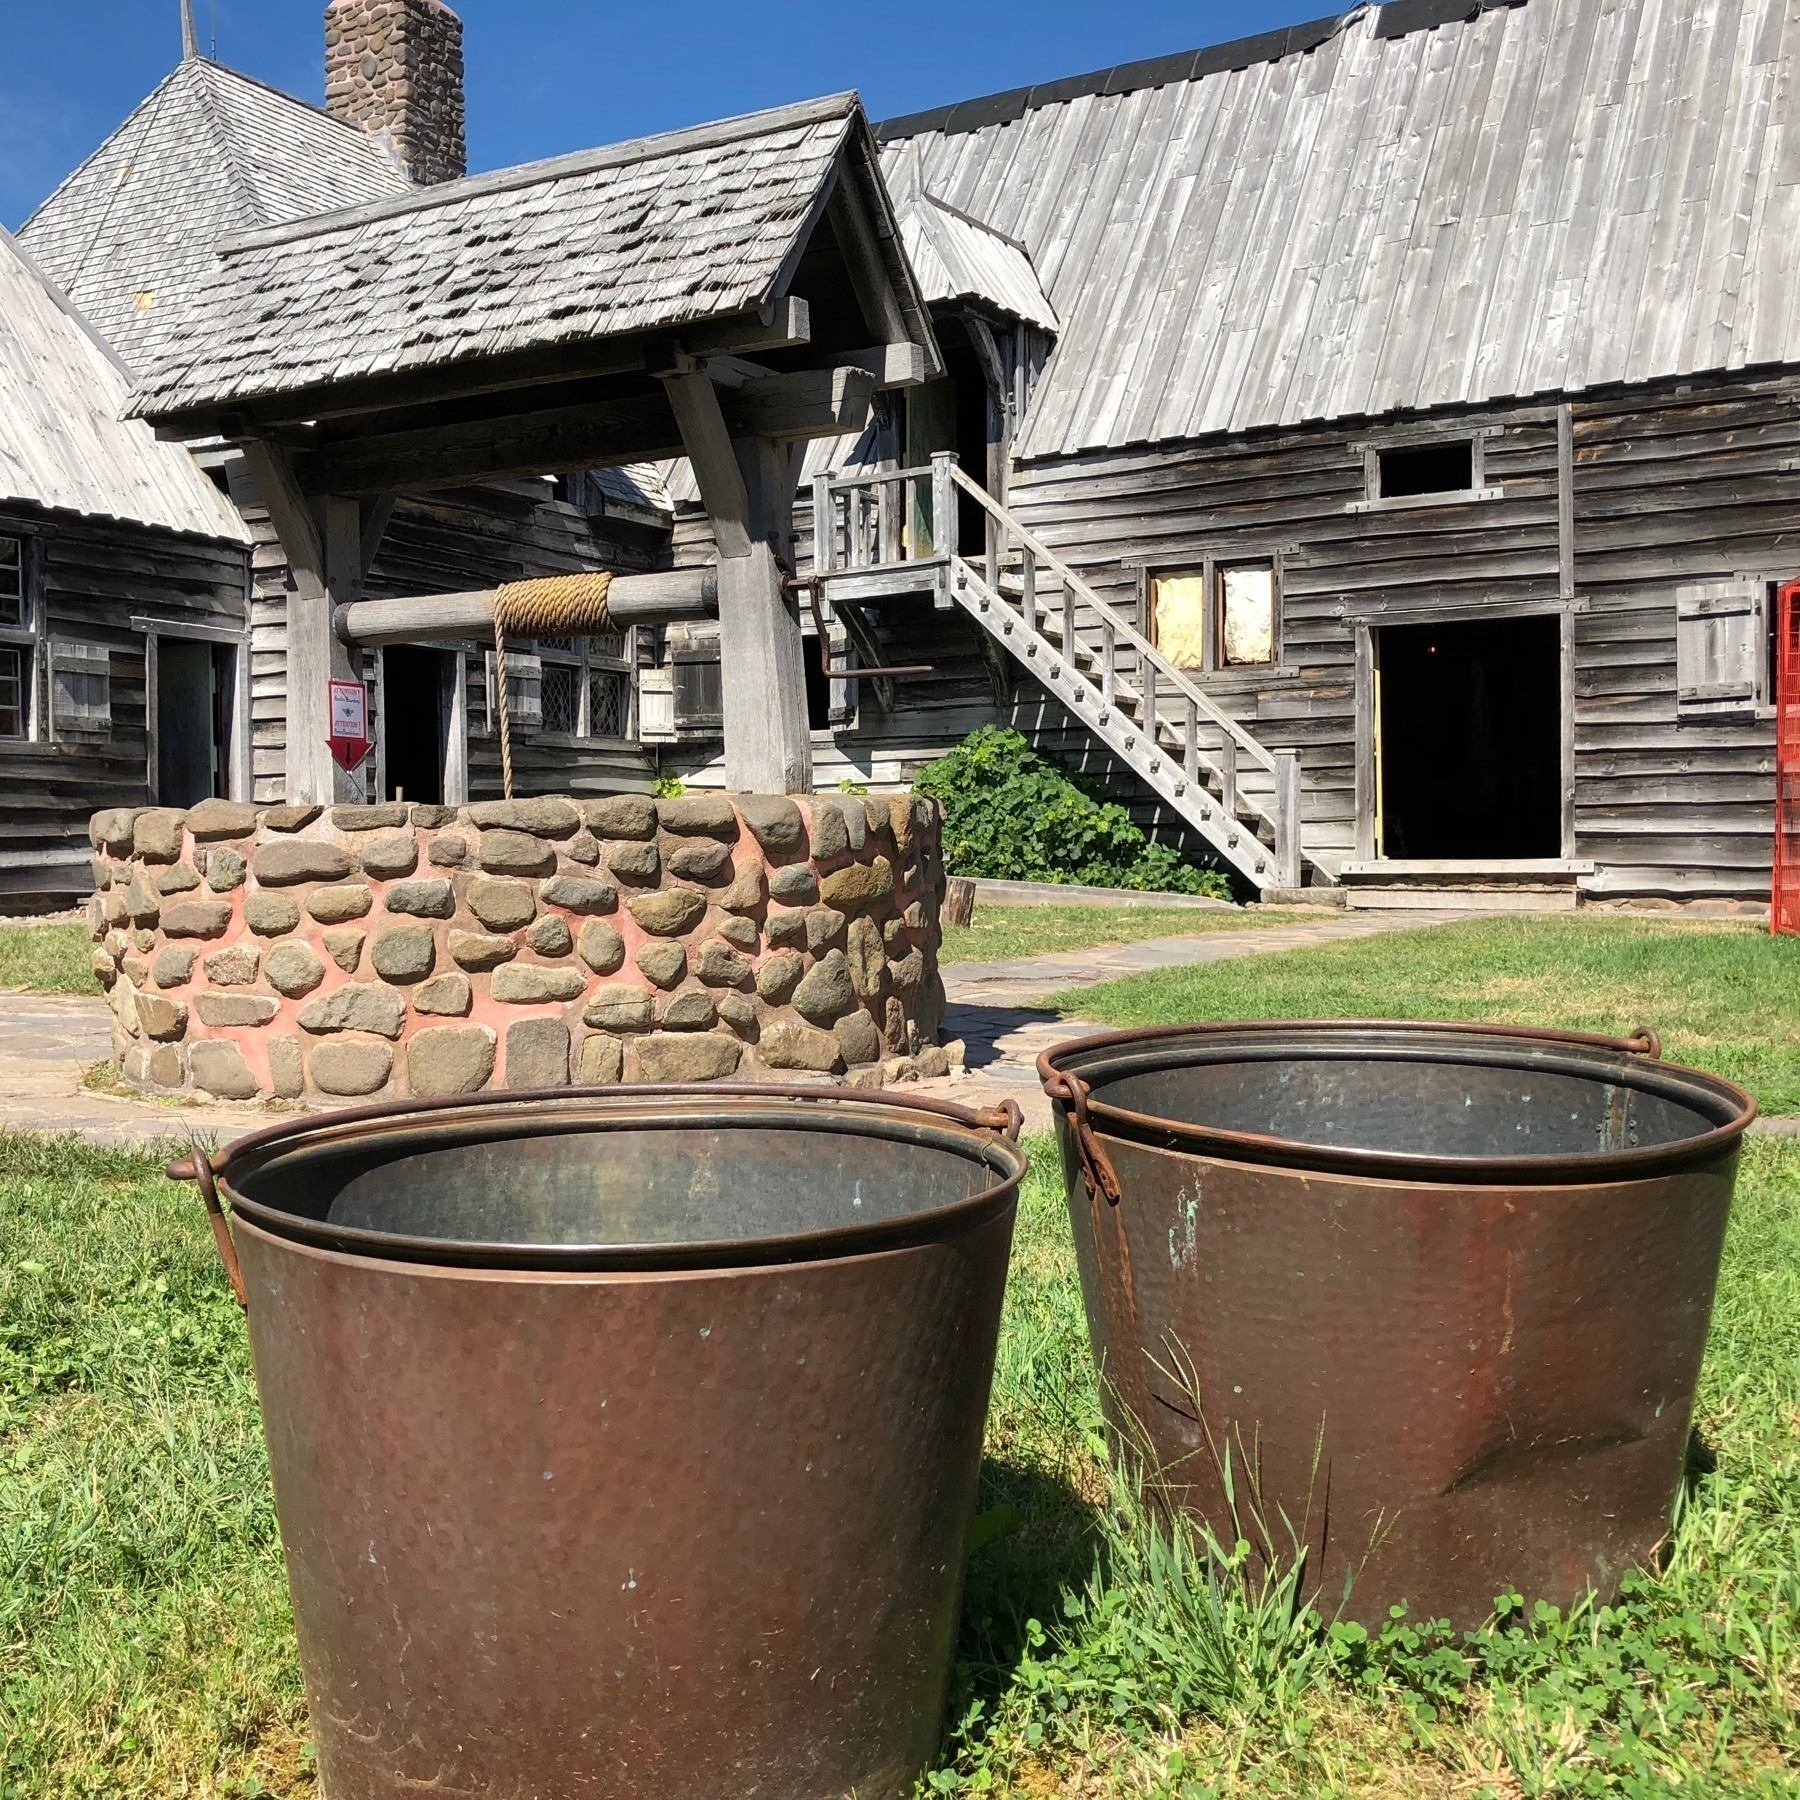 Two metal buckets and well in courtyard of historical settlement.